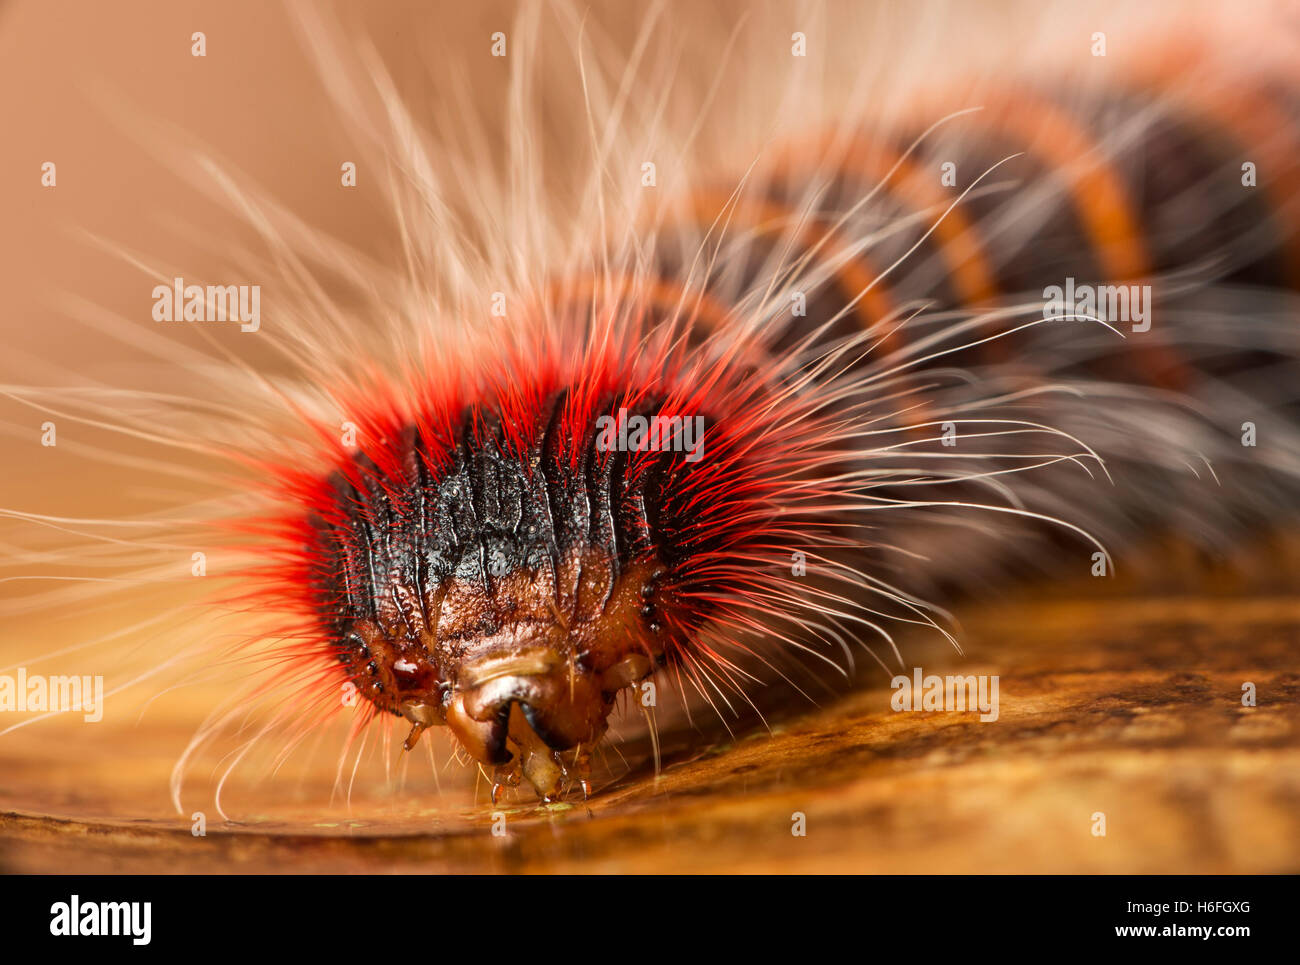 Amazon Rainforest Caterpillar High Resolution Stock Photography and Images  - Alamy